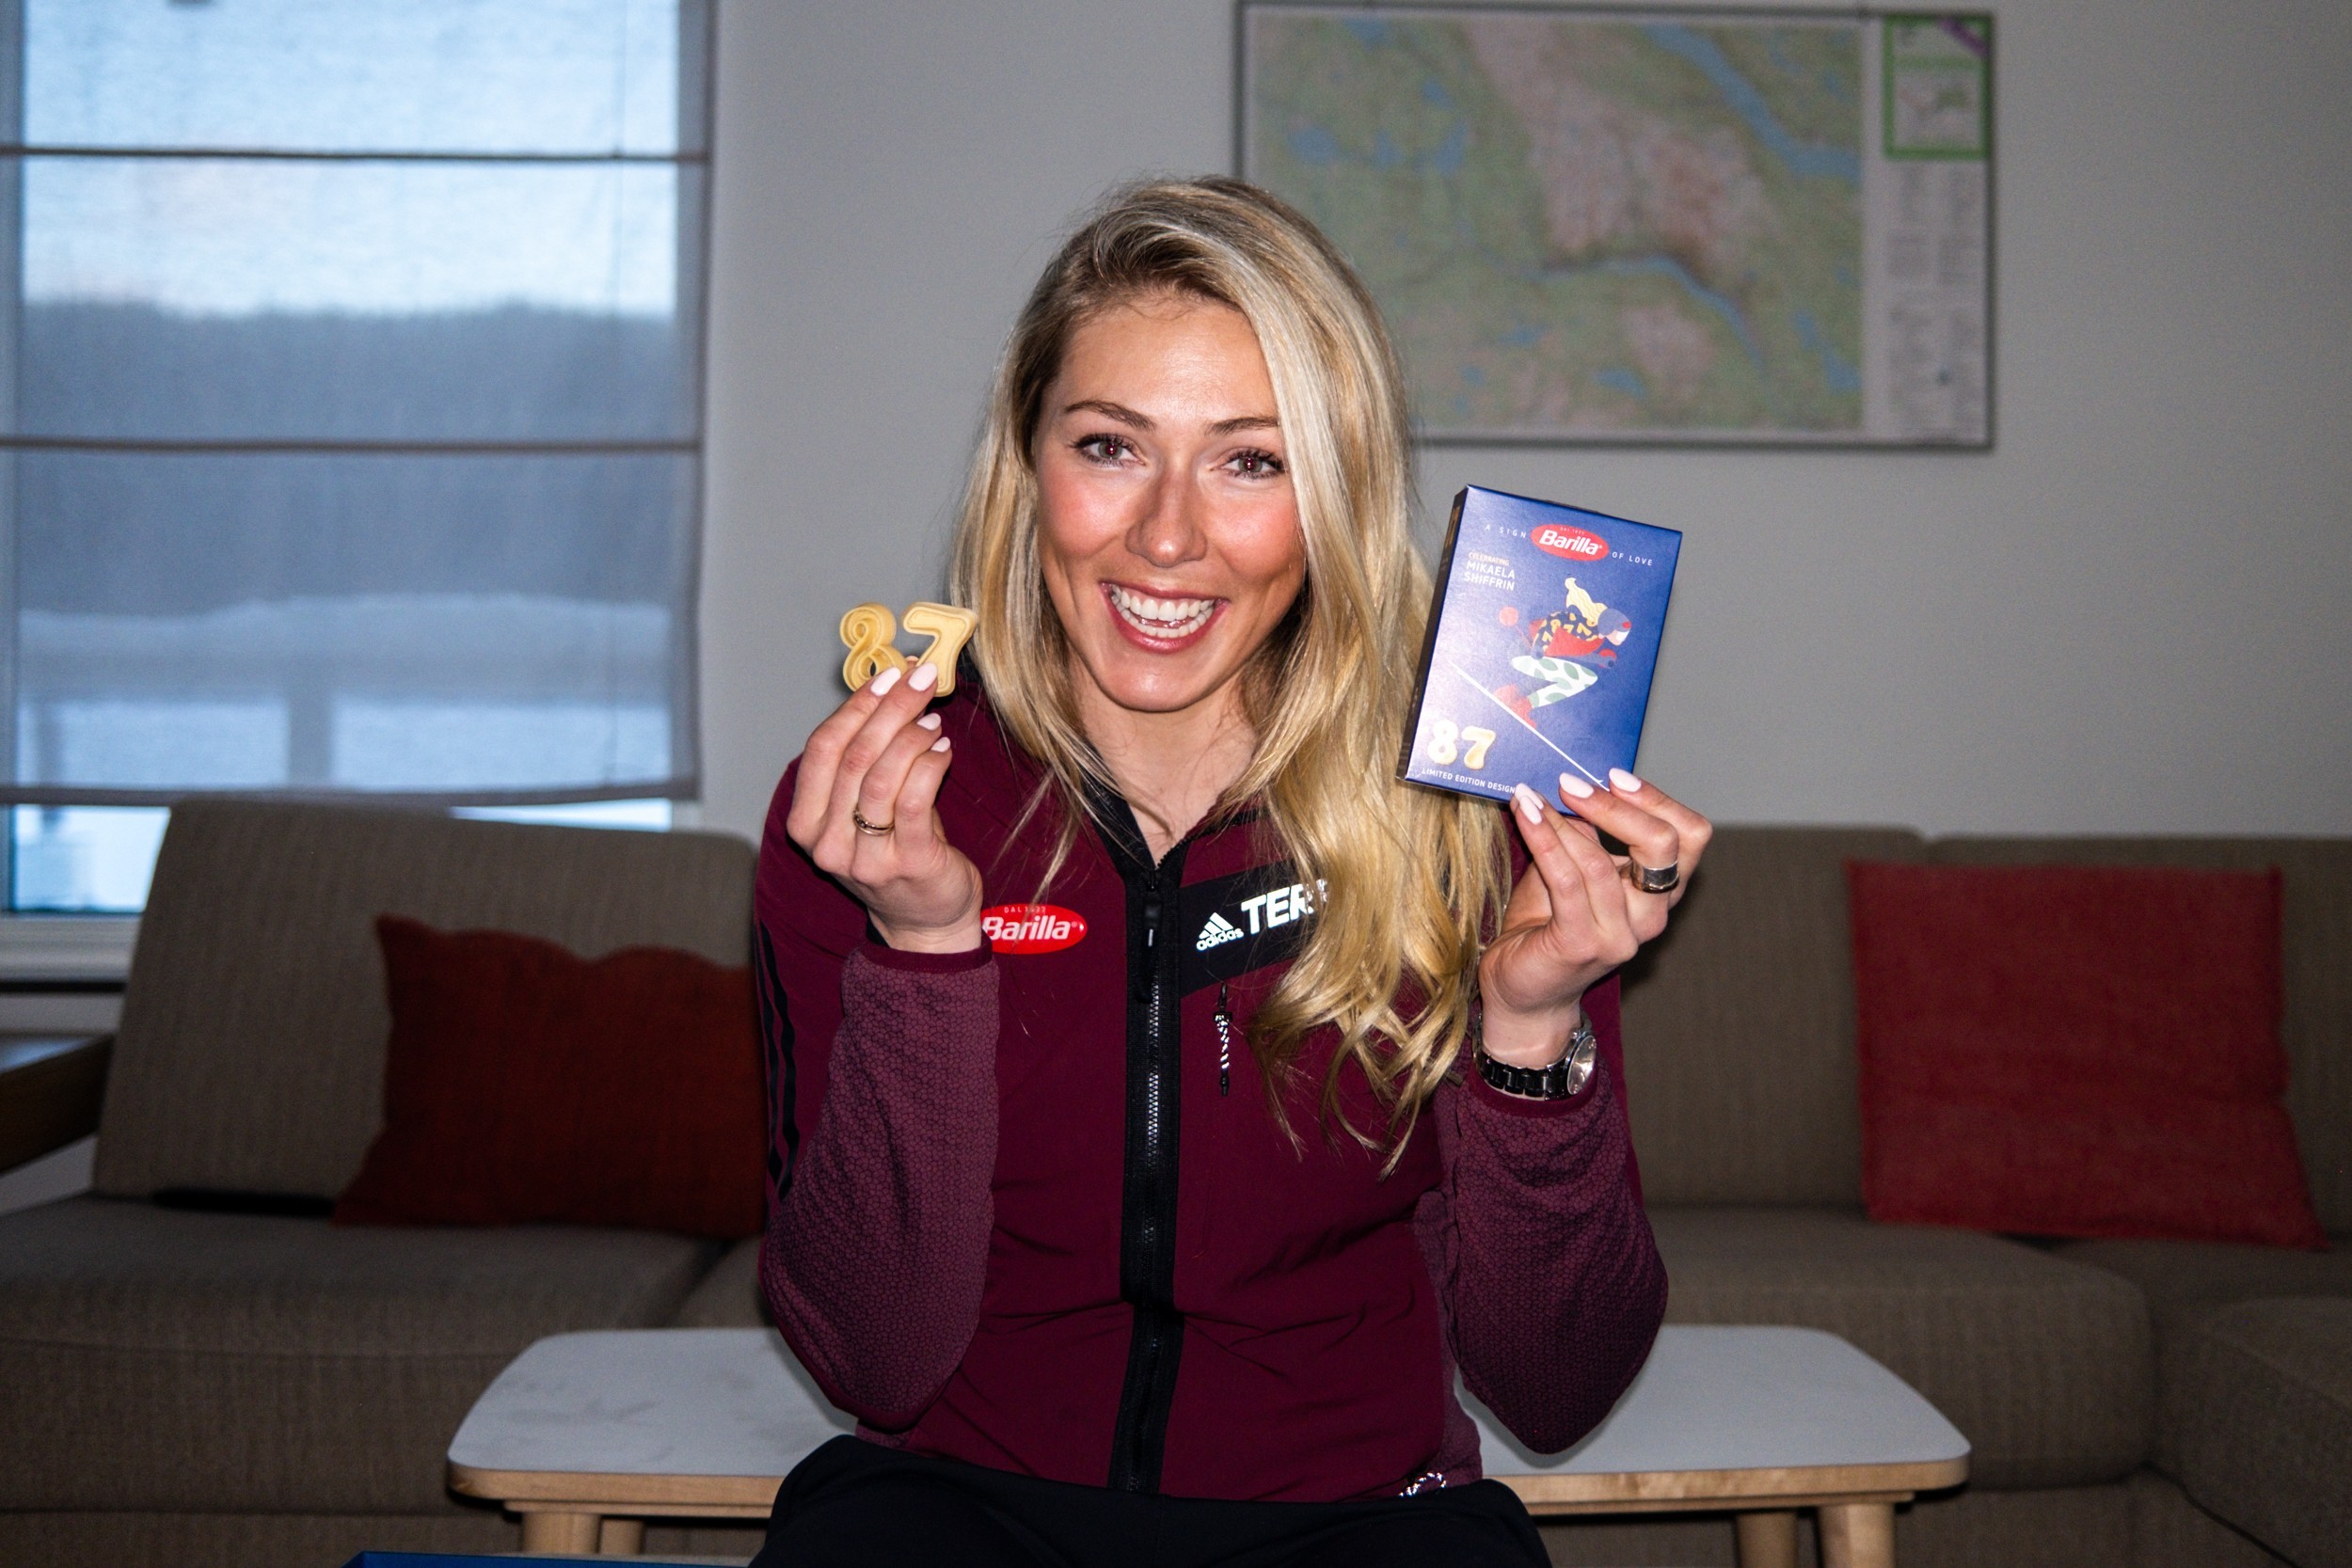 Barilla & Mikaela Shiffrin: Greatness starts with a great recipe - Pack No. 29